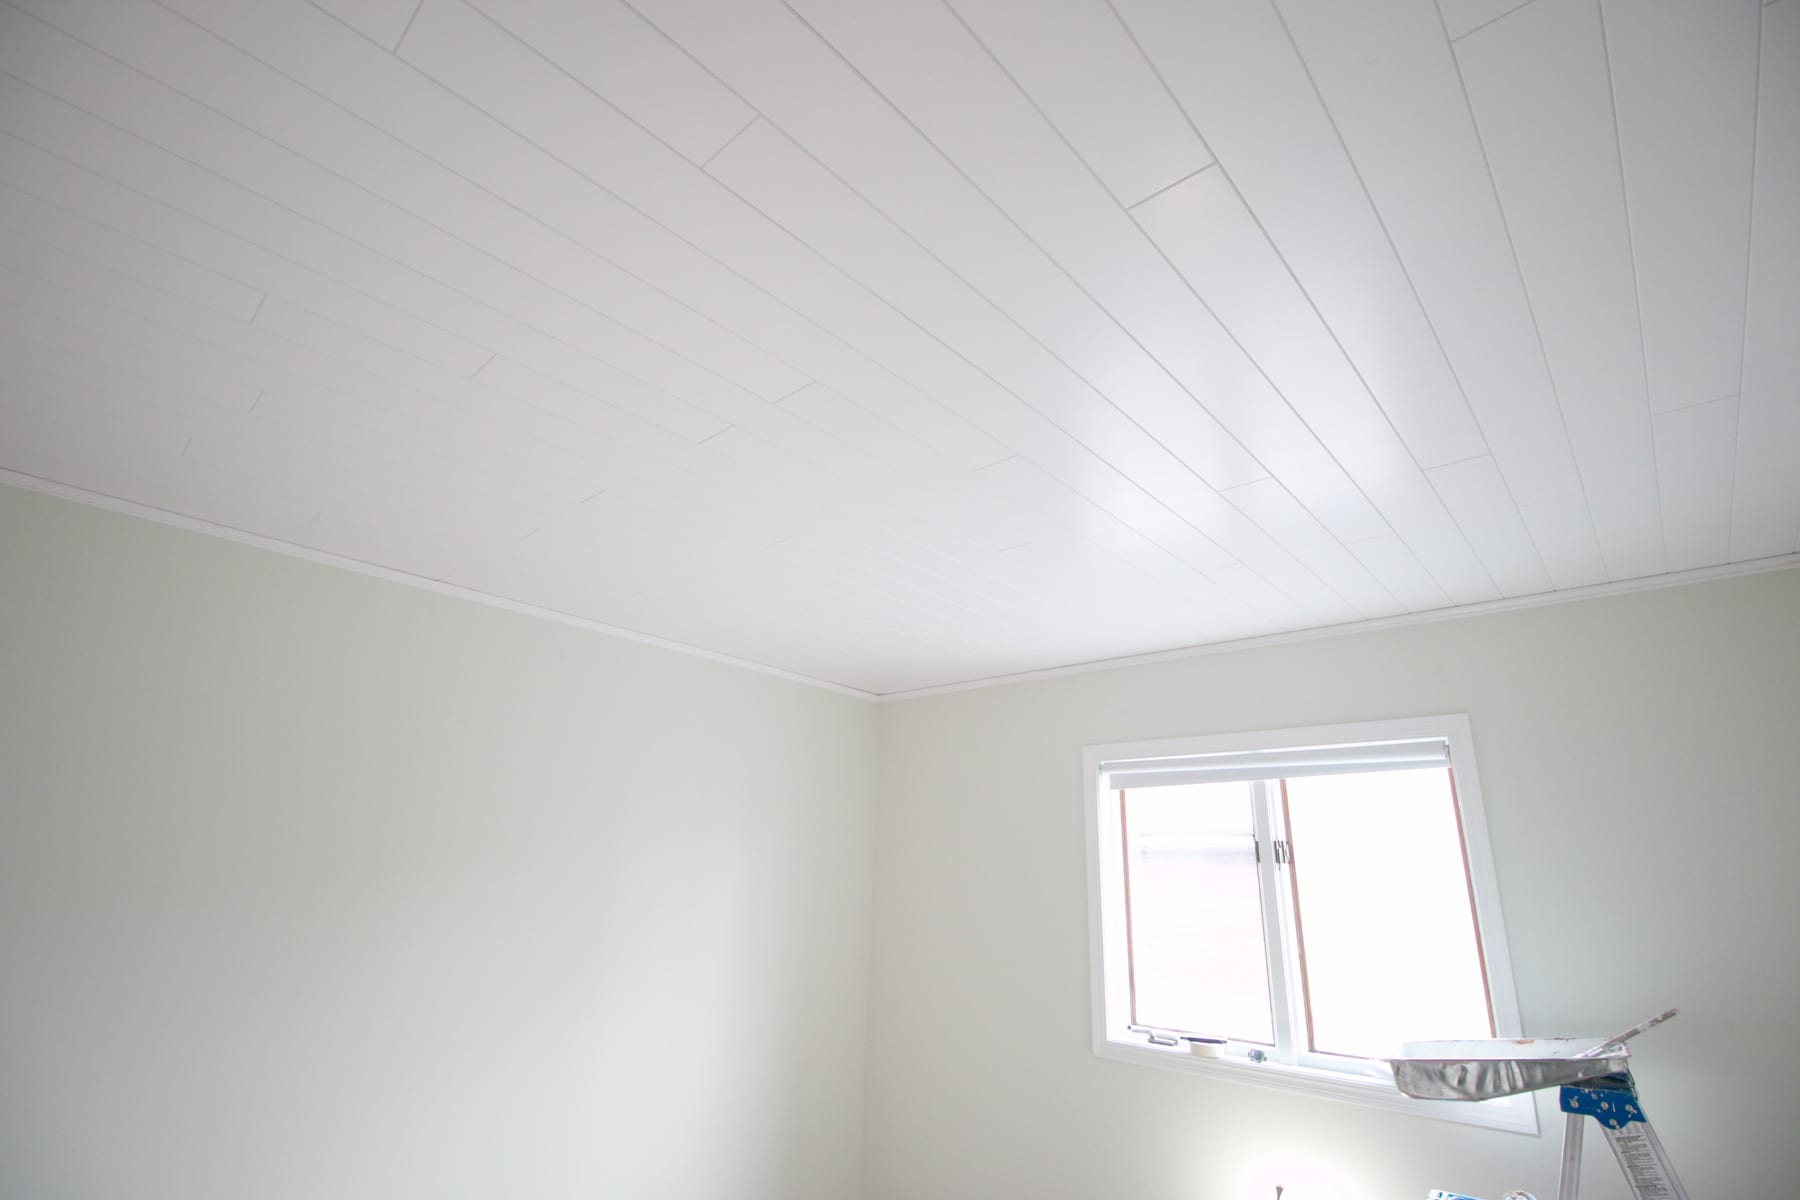 The final step is to add some trim or molding to your ceiling to cover the gaps and make a fresh look. 